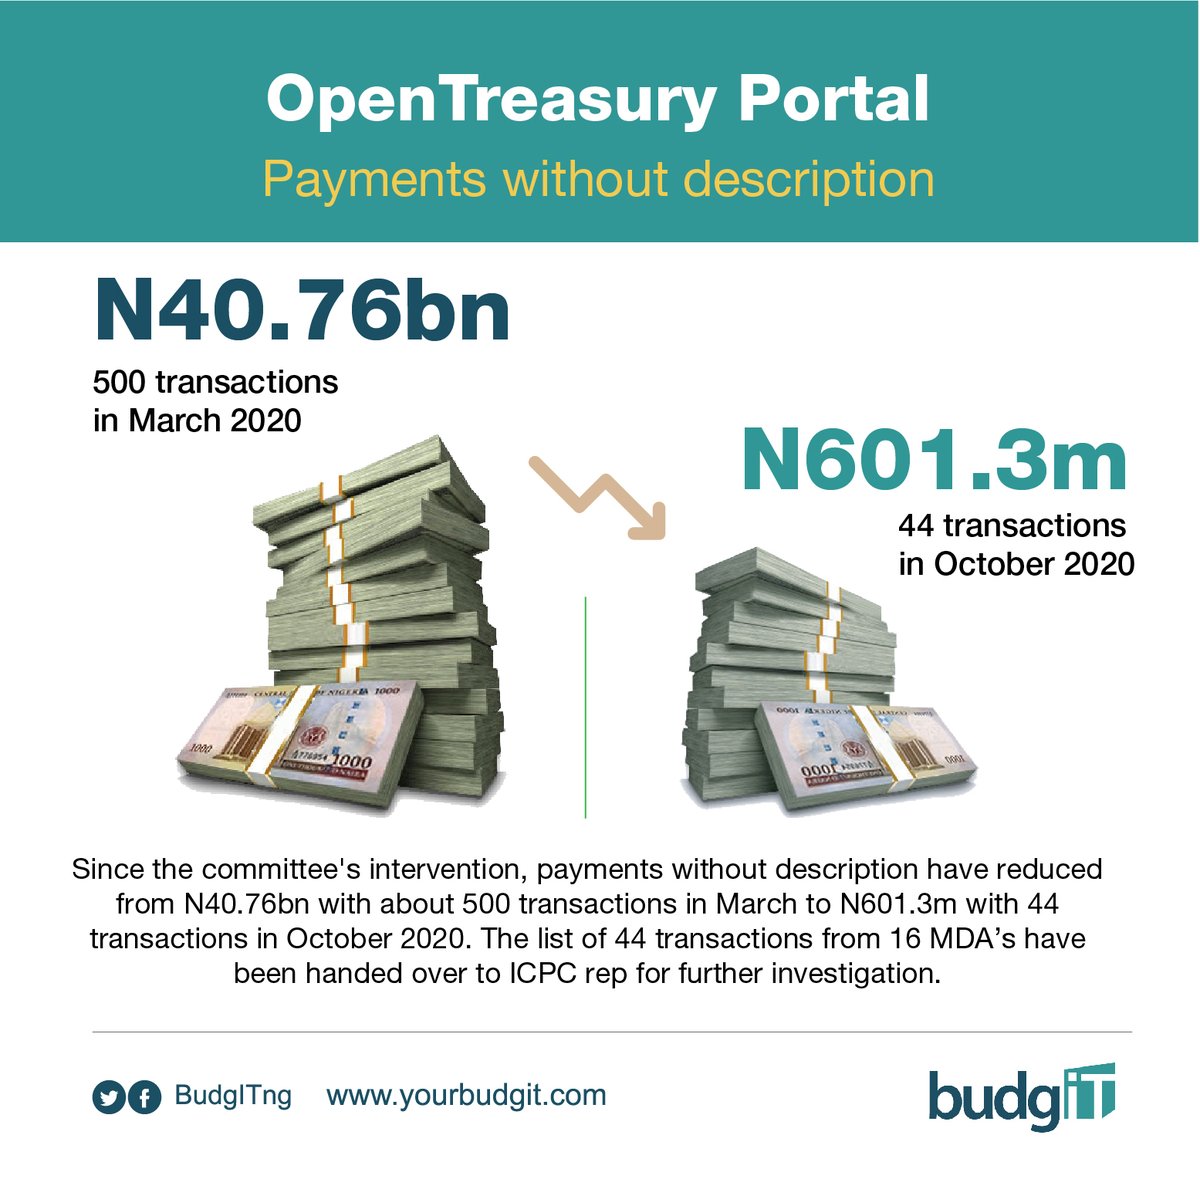 Since the committee's intervention, payments without description have reduced from N40.76bn with about 500 transactions in March to N601.3m with 44 transactions in October 2020.  #EndBadGovernance